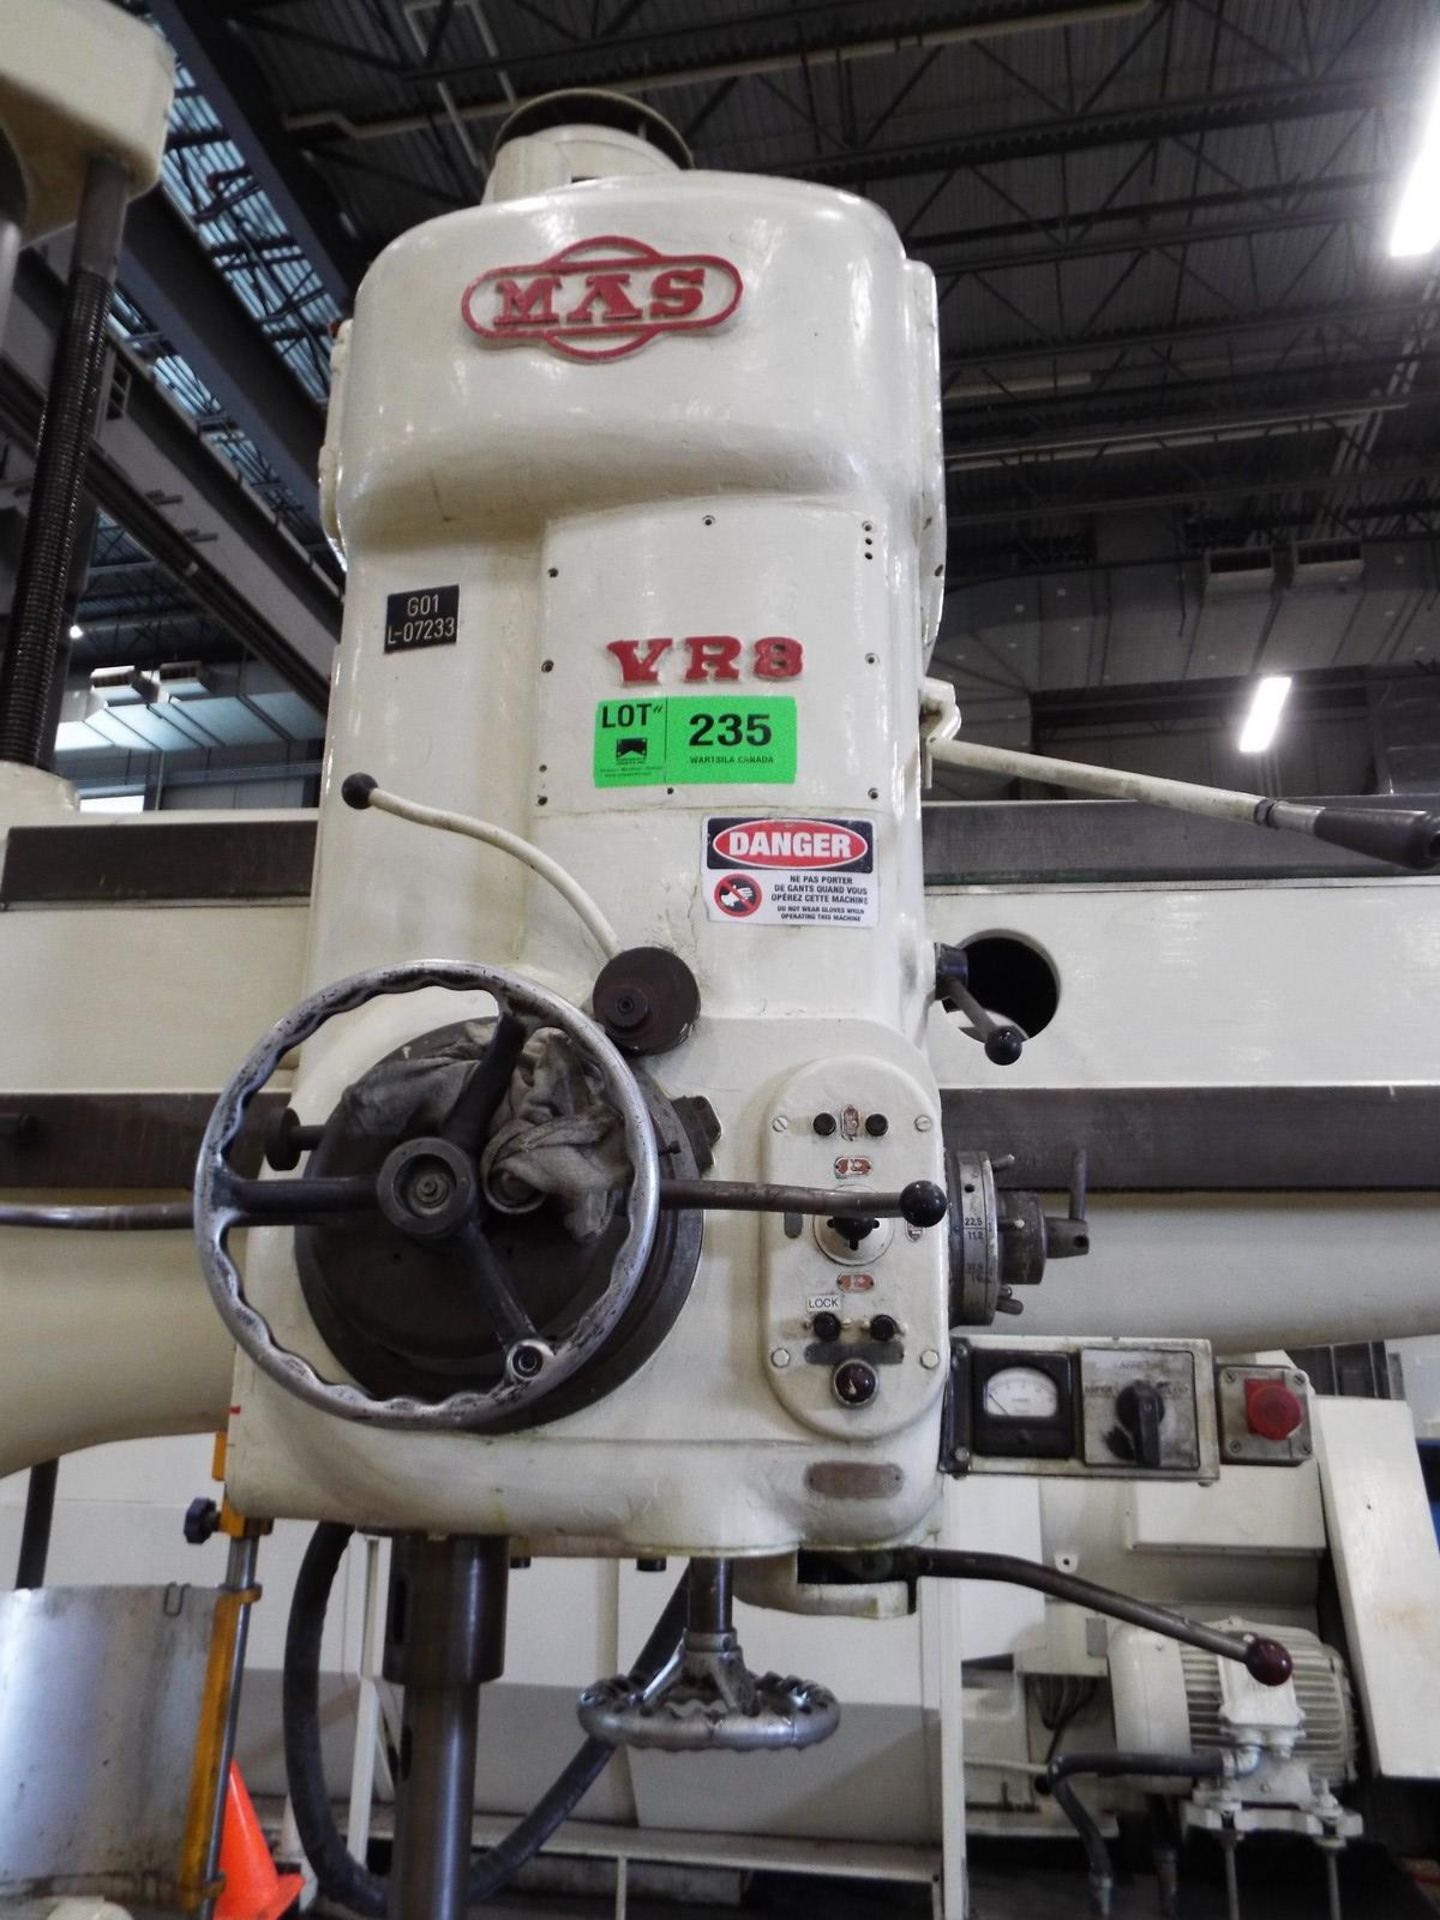 MAS VR8 RADIAL ARM DRILL WITH 8'6" ARM, 20" COLUMN, SPEEDS TO 1750 RPM, 48"X48"X30" BOX TABLE, - Image 3 of 4